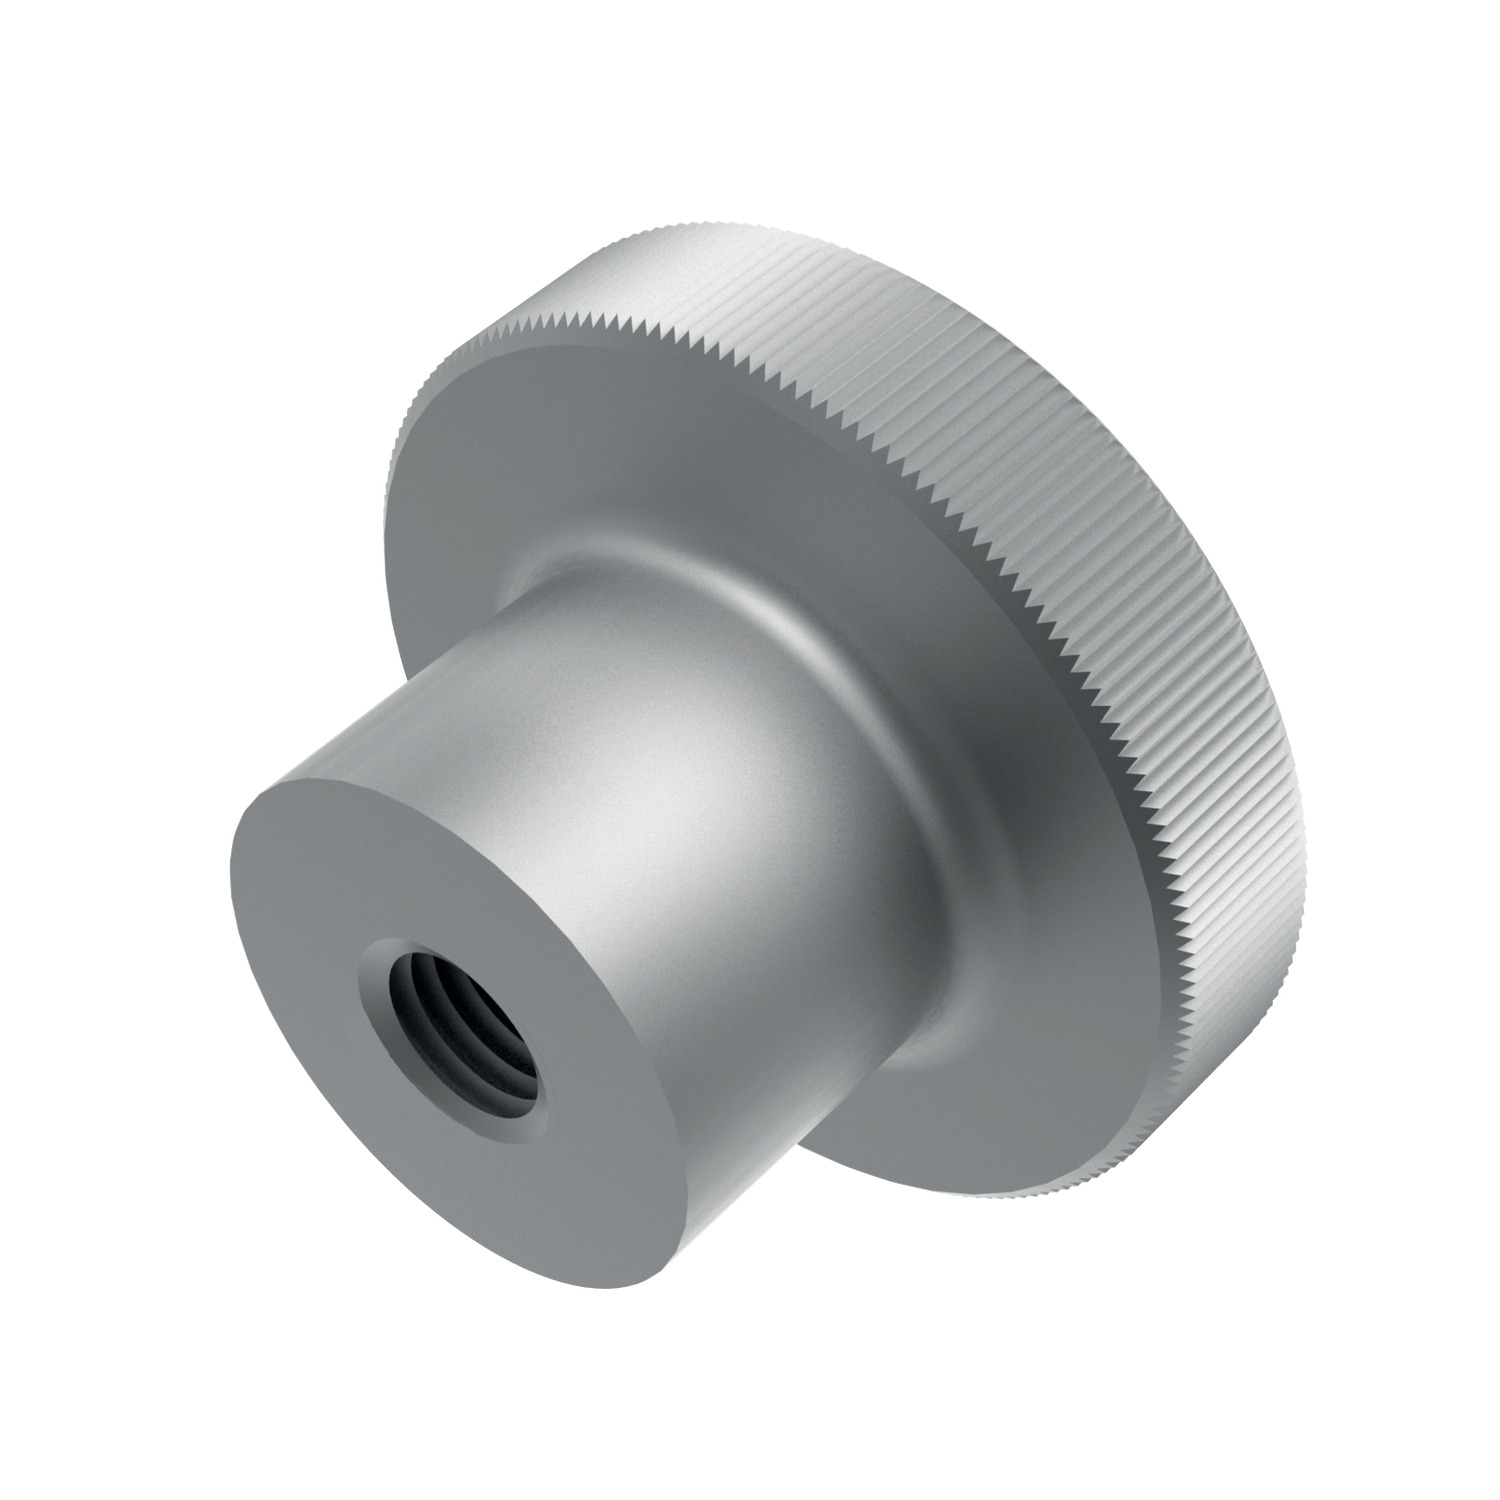 P0403.A2 Knurled Thumb Nuts